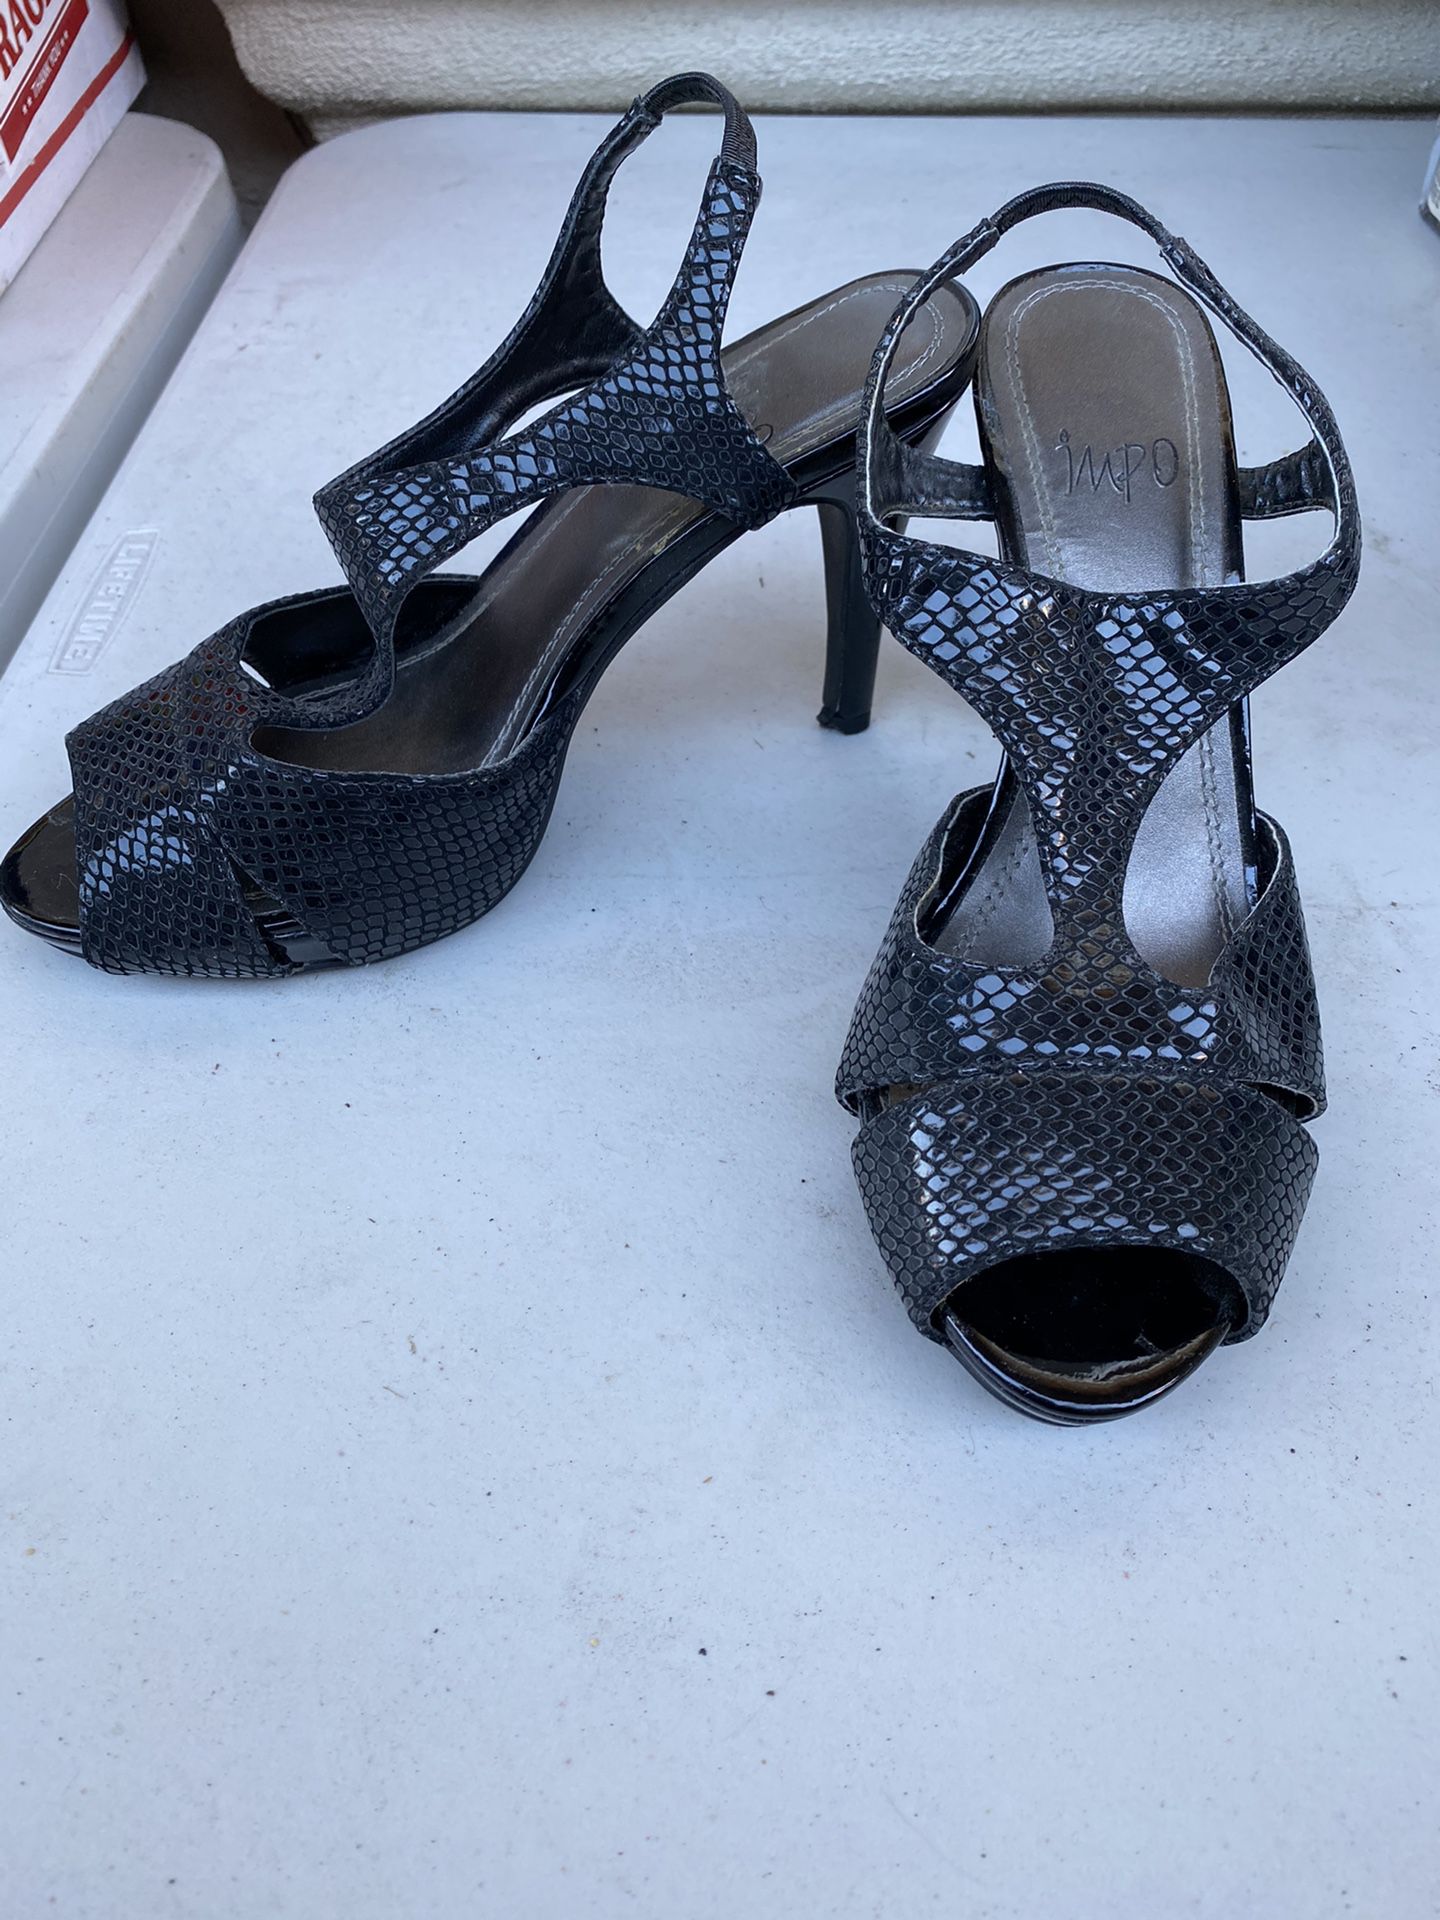 Impo size 7.5 woman’s heels